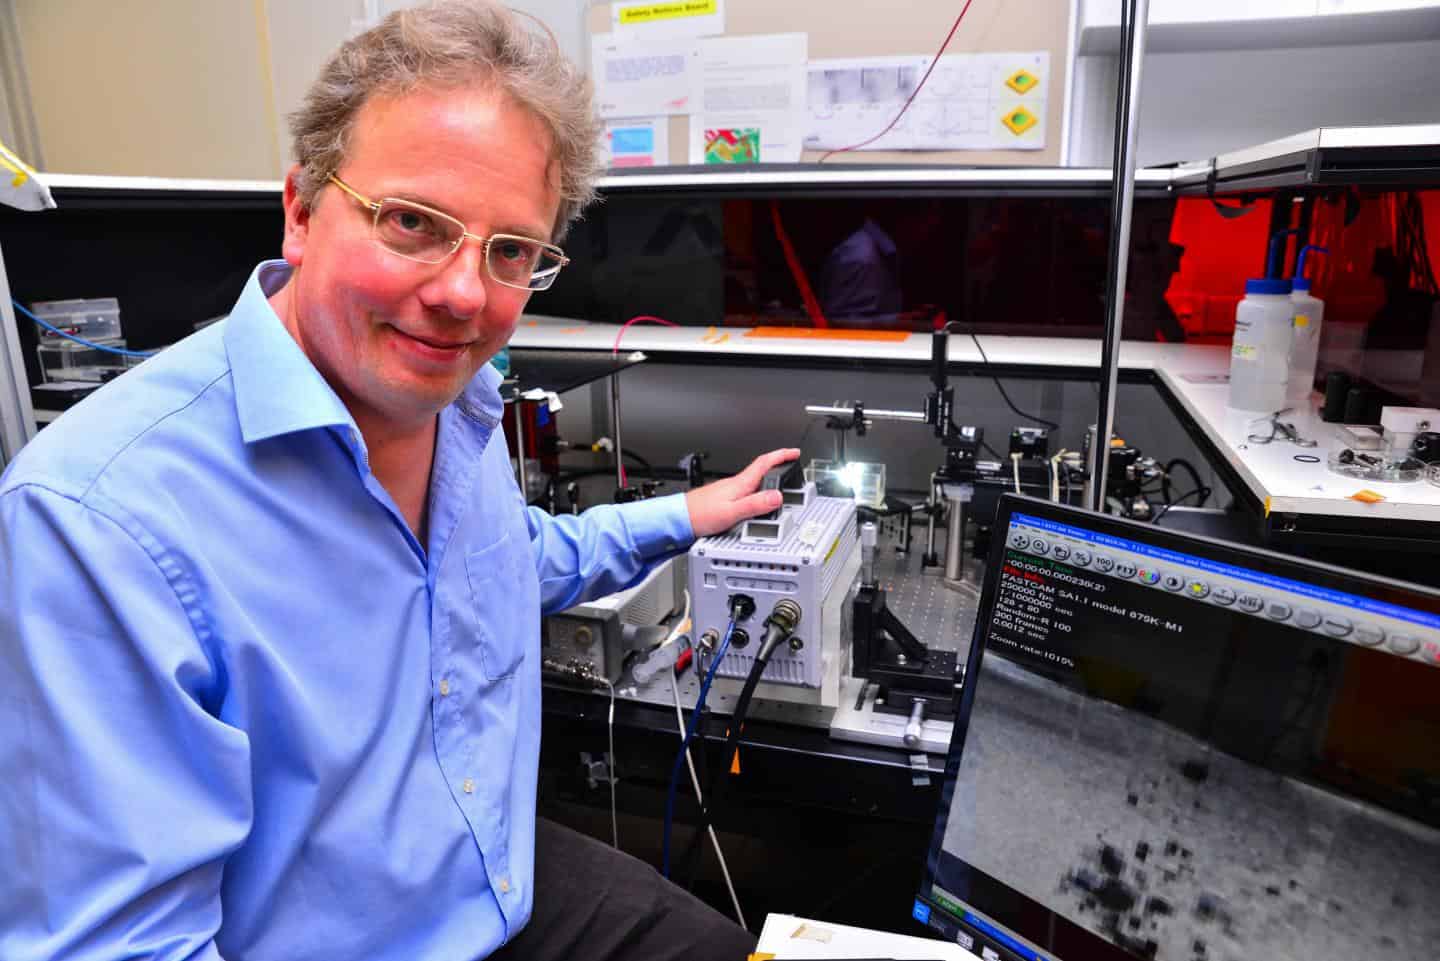 Claus-Dieter Ohl's team has developed a new ultrasound device that will allow for more accurate use of ultrasound to kill tumours, loosen blood clots and deliver drugs into targeted cells.